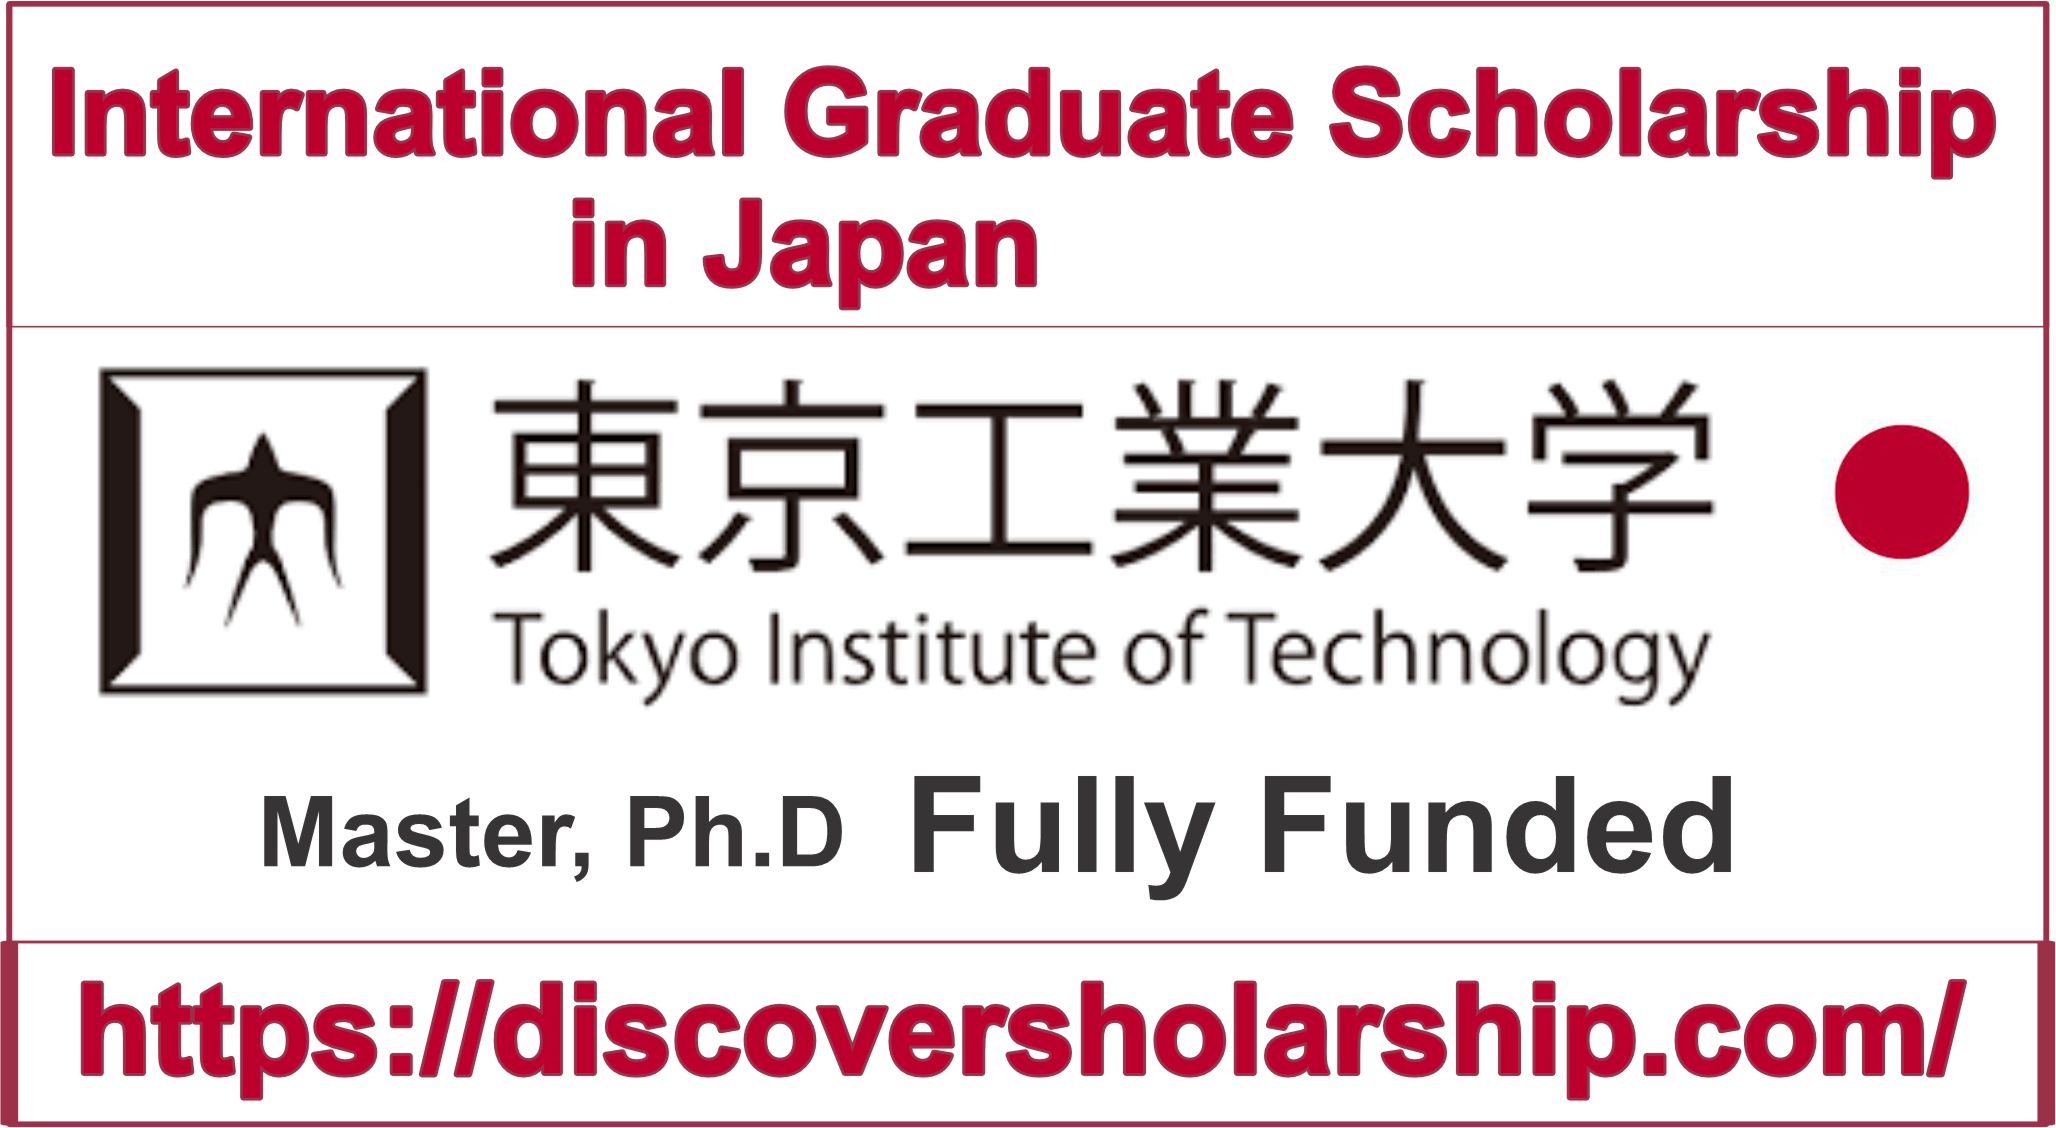 We are excited to announce the opening of applications for the International Graduate Scholarship 2024-25 at the Tokyo Institute of Technology in Japan. This scholarship is available to students from all around the globe interested in pursuing a Master's or PhD degree in Japan. The Tokyo Institute of Technology is proud to offer this fully funded opportunity to international students of any nationality for the upcoming academic year 2024-2025.